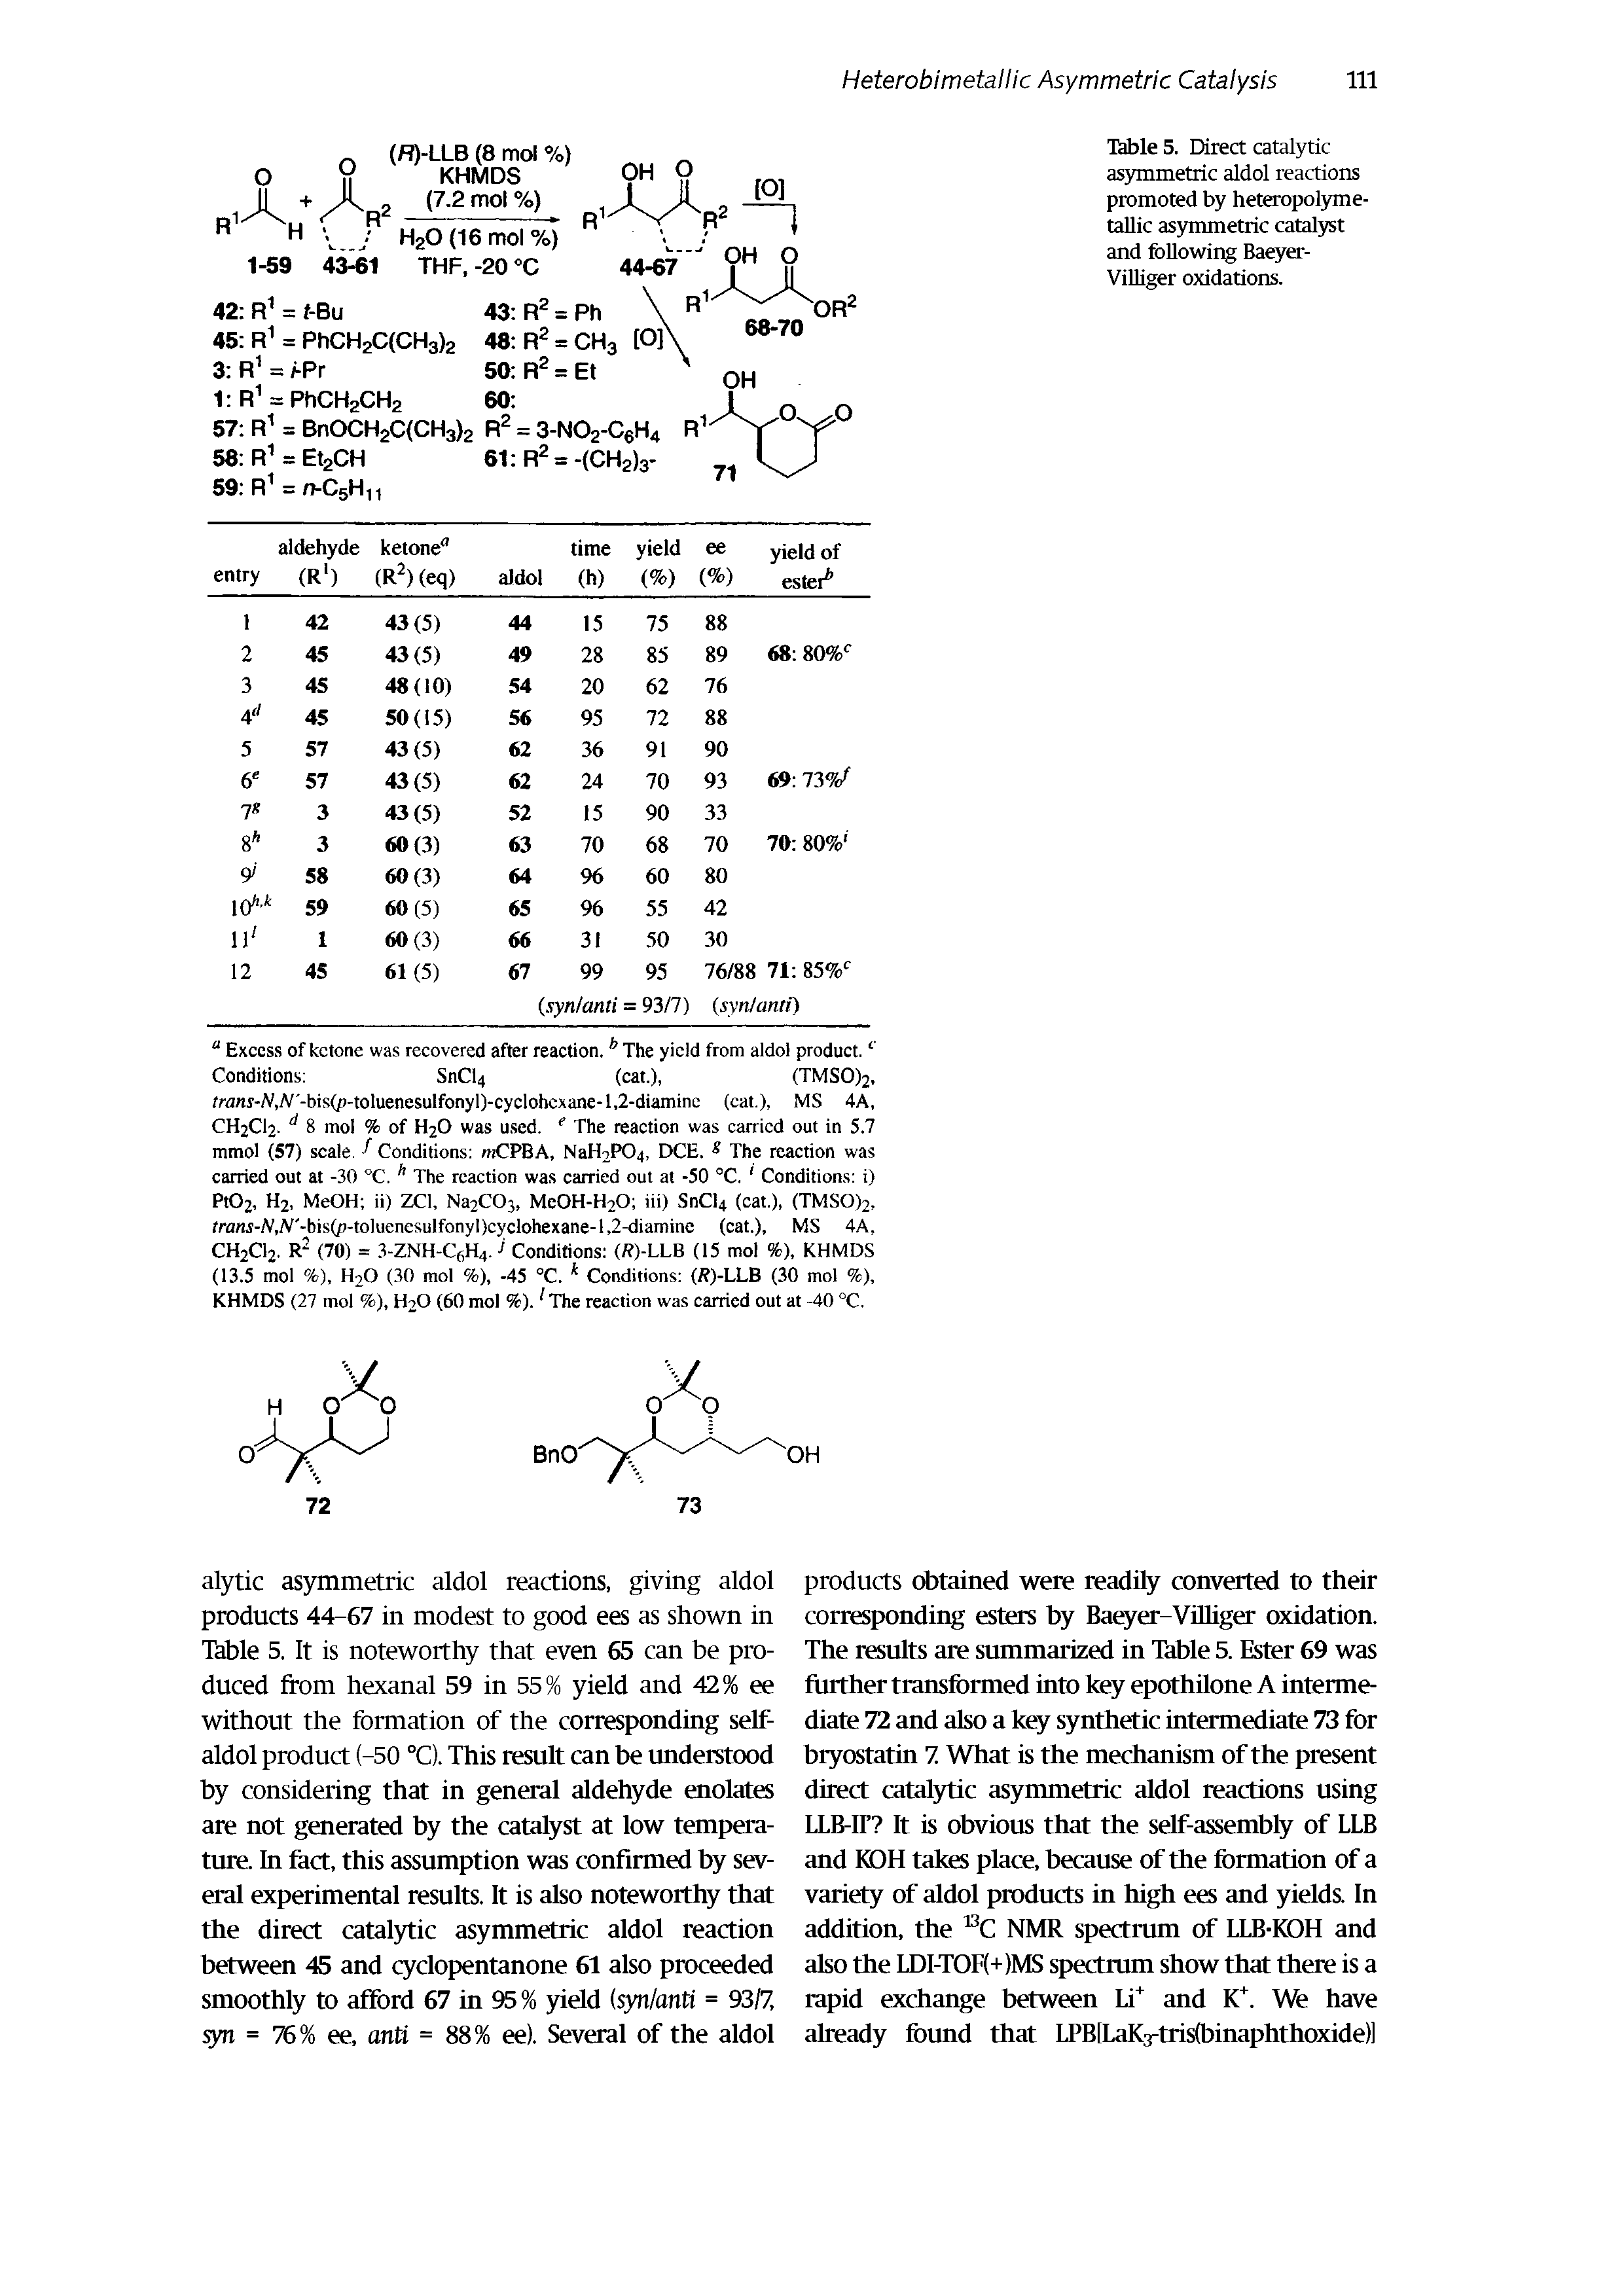 Table 5. Direct catalytic asymmetric aldol reactions promoted by heteropolyme-tallic asymmetric catalyst and following Baeyer-Villiger oxidations.